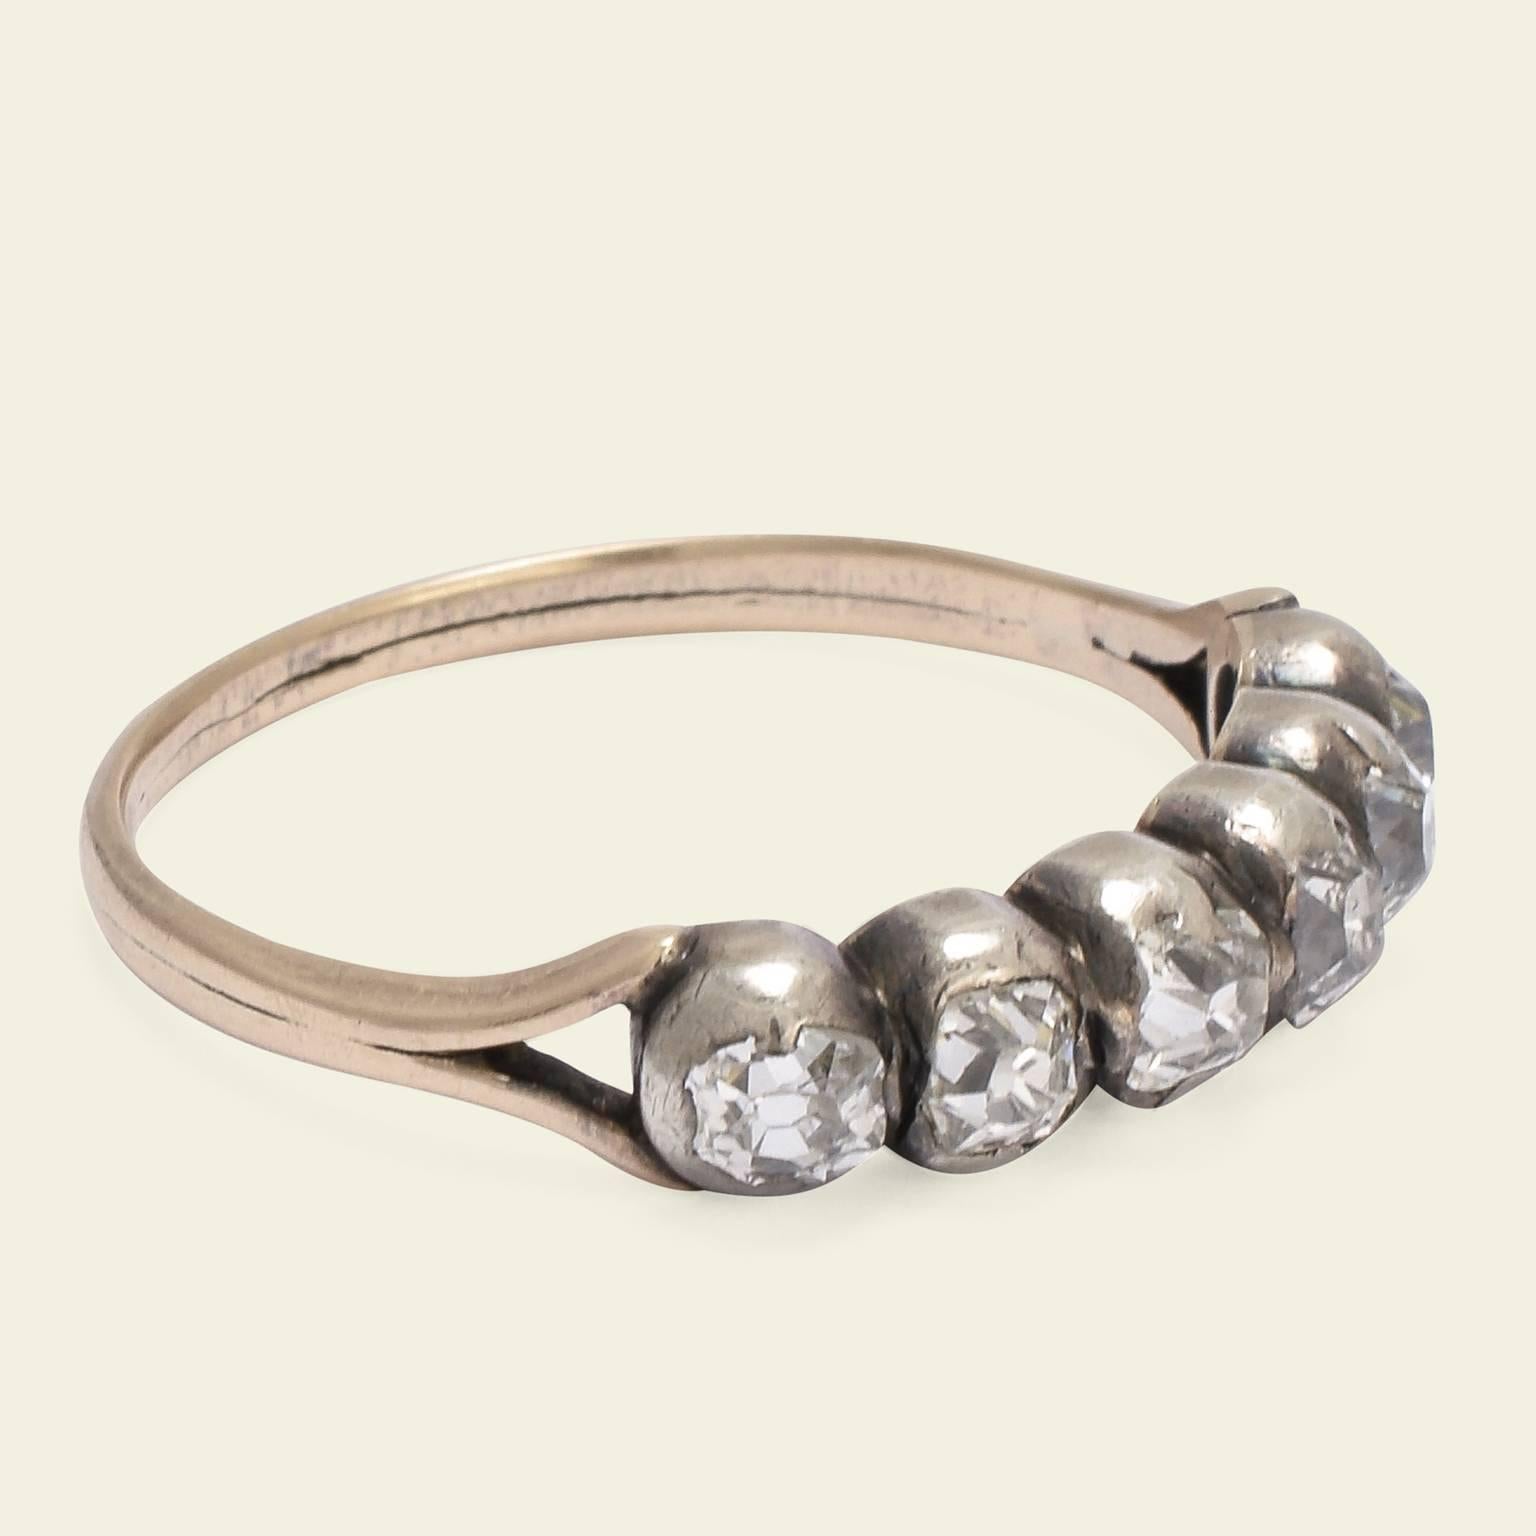 This lovely six diamond ring is a wonderful example of the simple half-hoop style popular in late Georgian Britain (the style is called a 